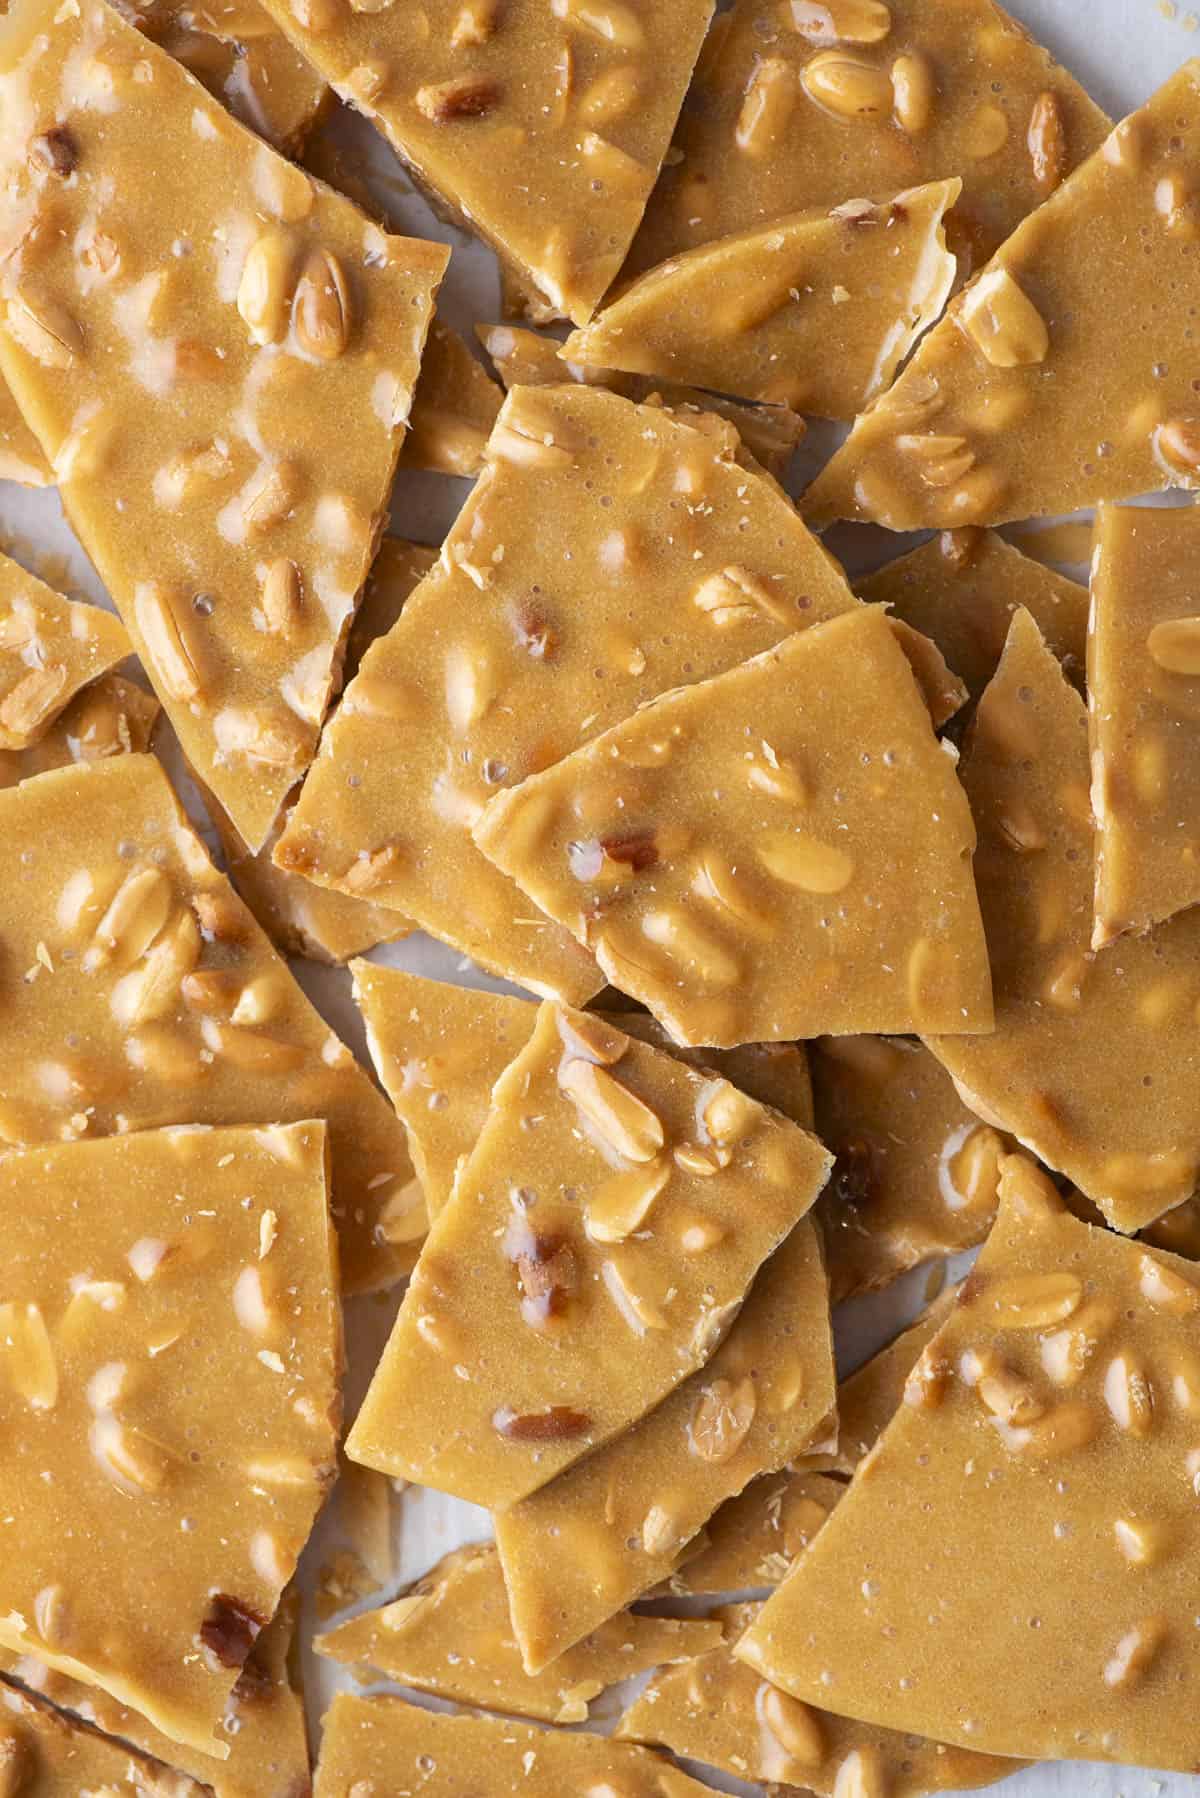 close up of a pile of peanut brittle pieces on a countertop surface